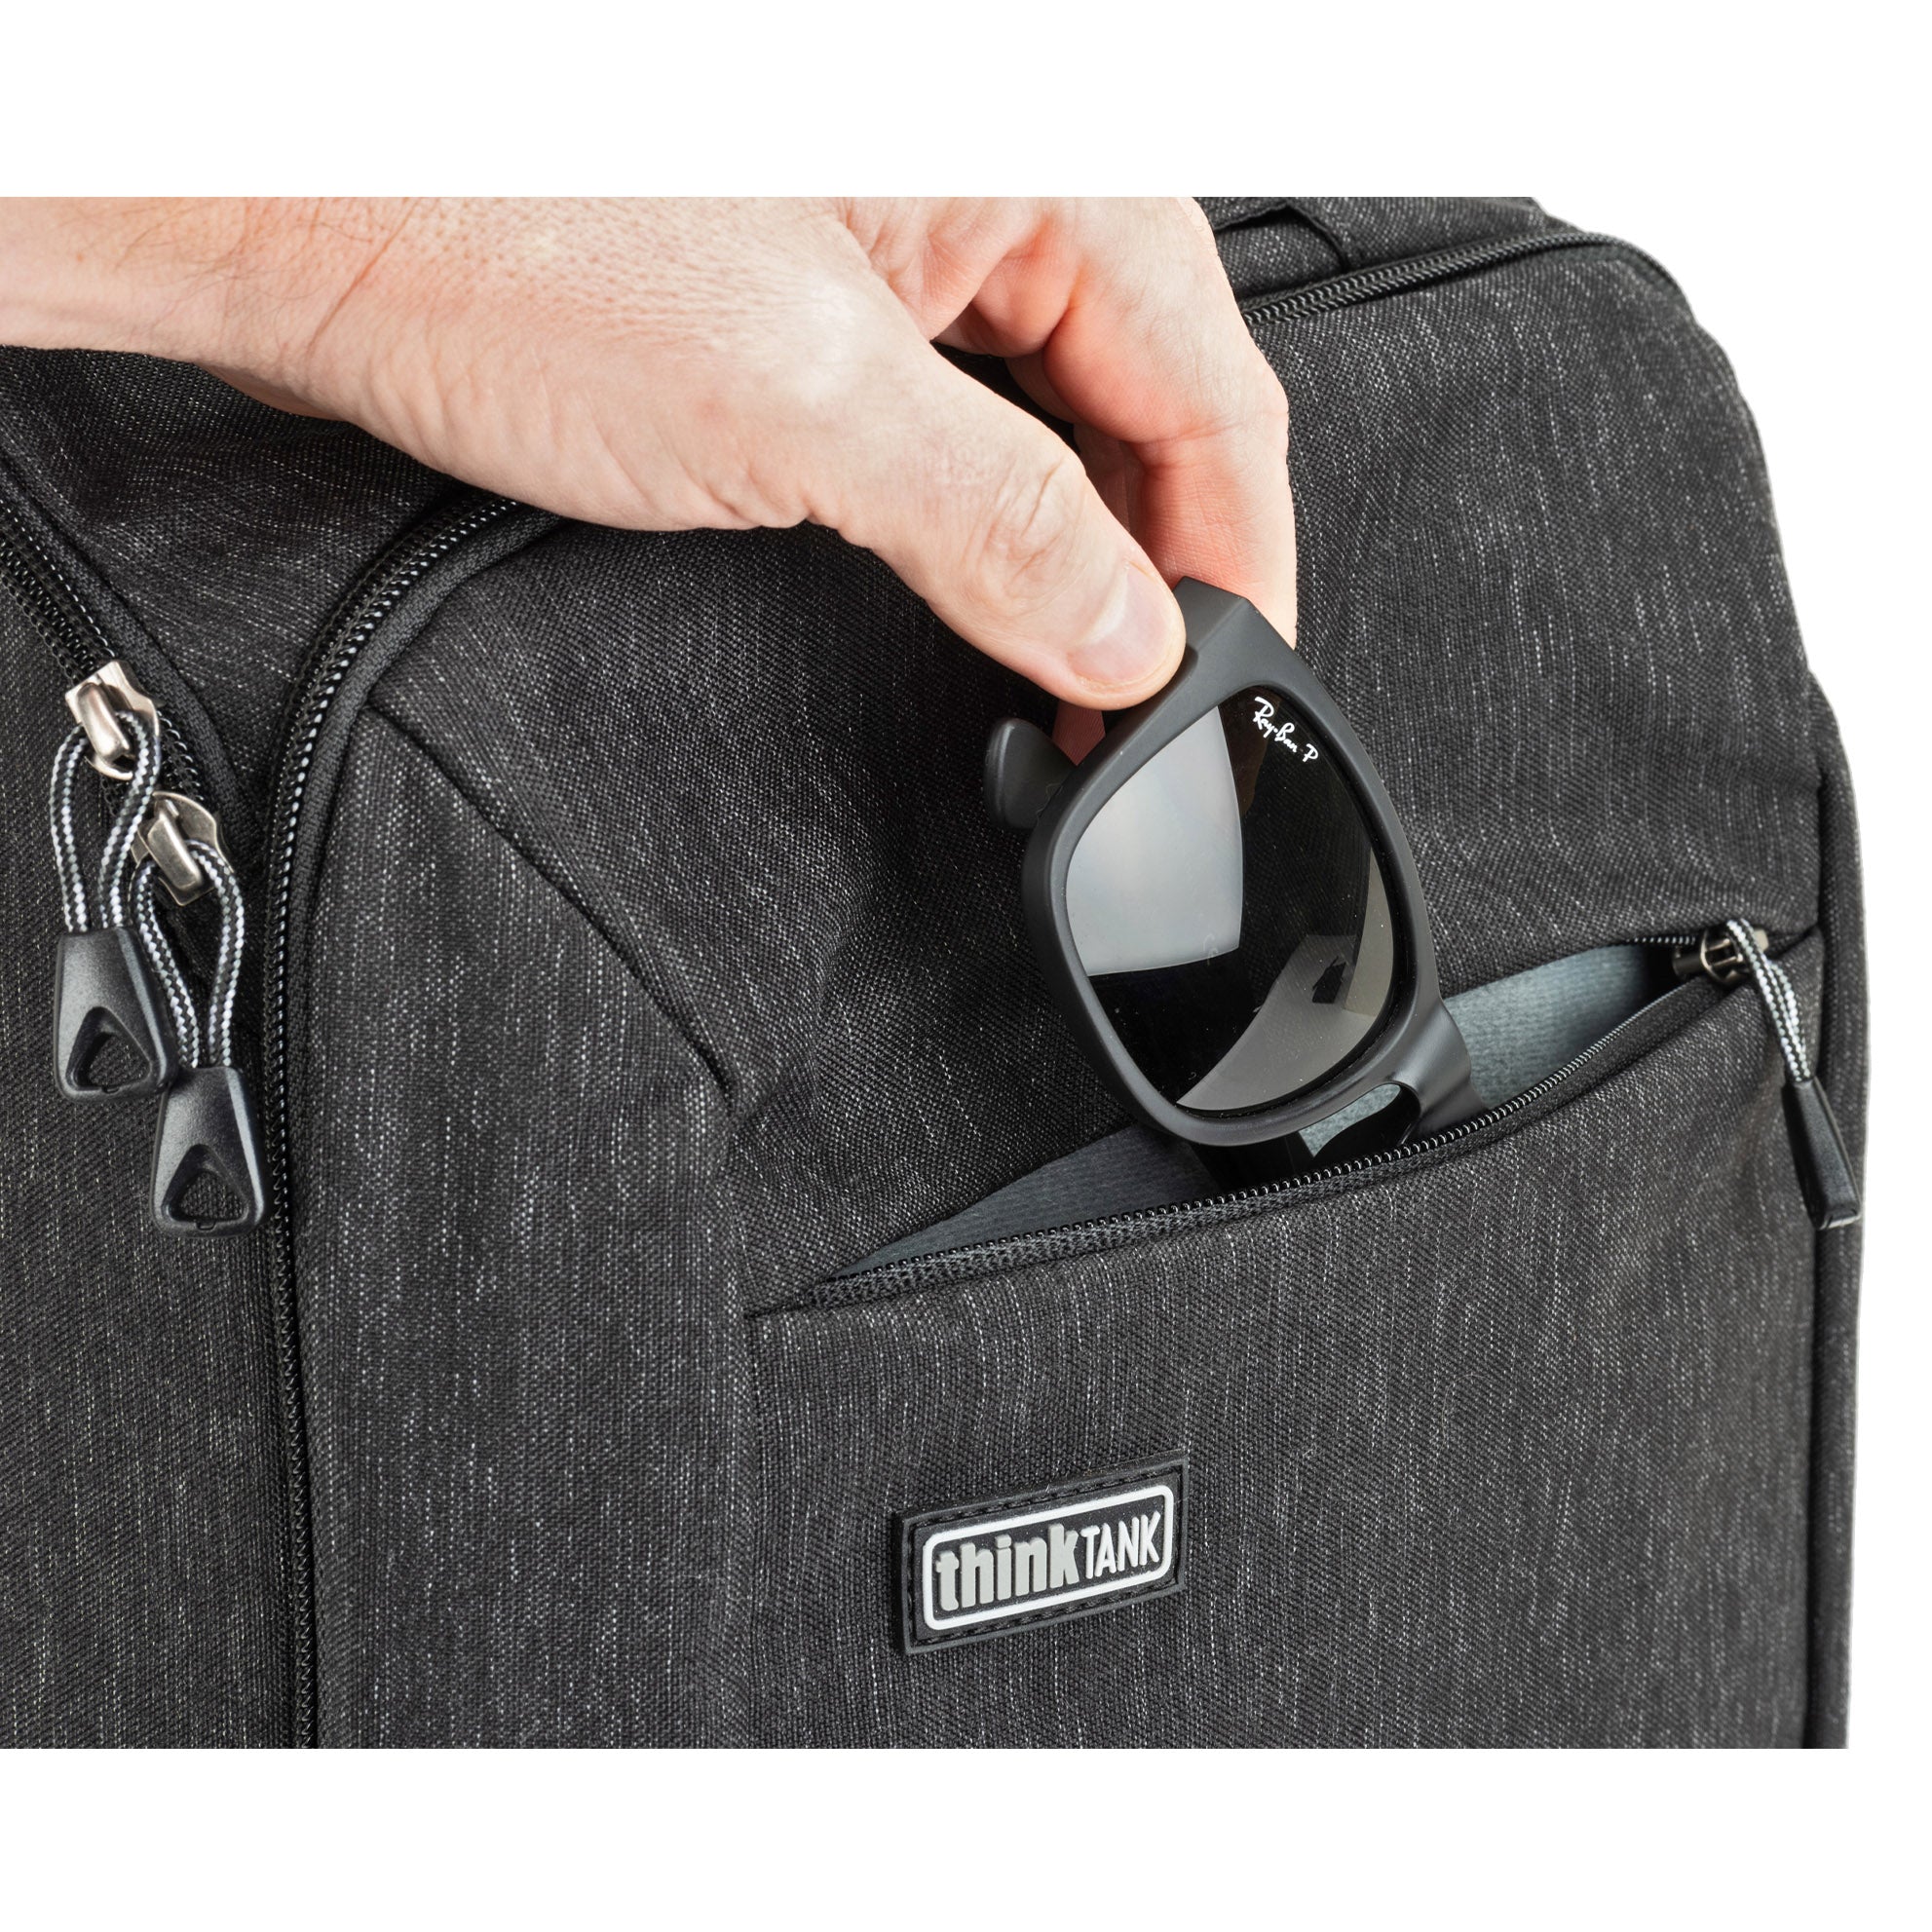 Microfiber-lined exterior pocket for today’s plus-sized phones or sunglasses